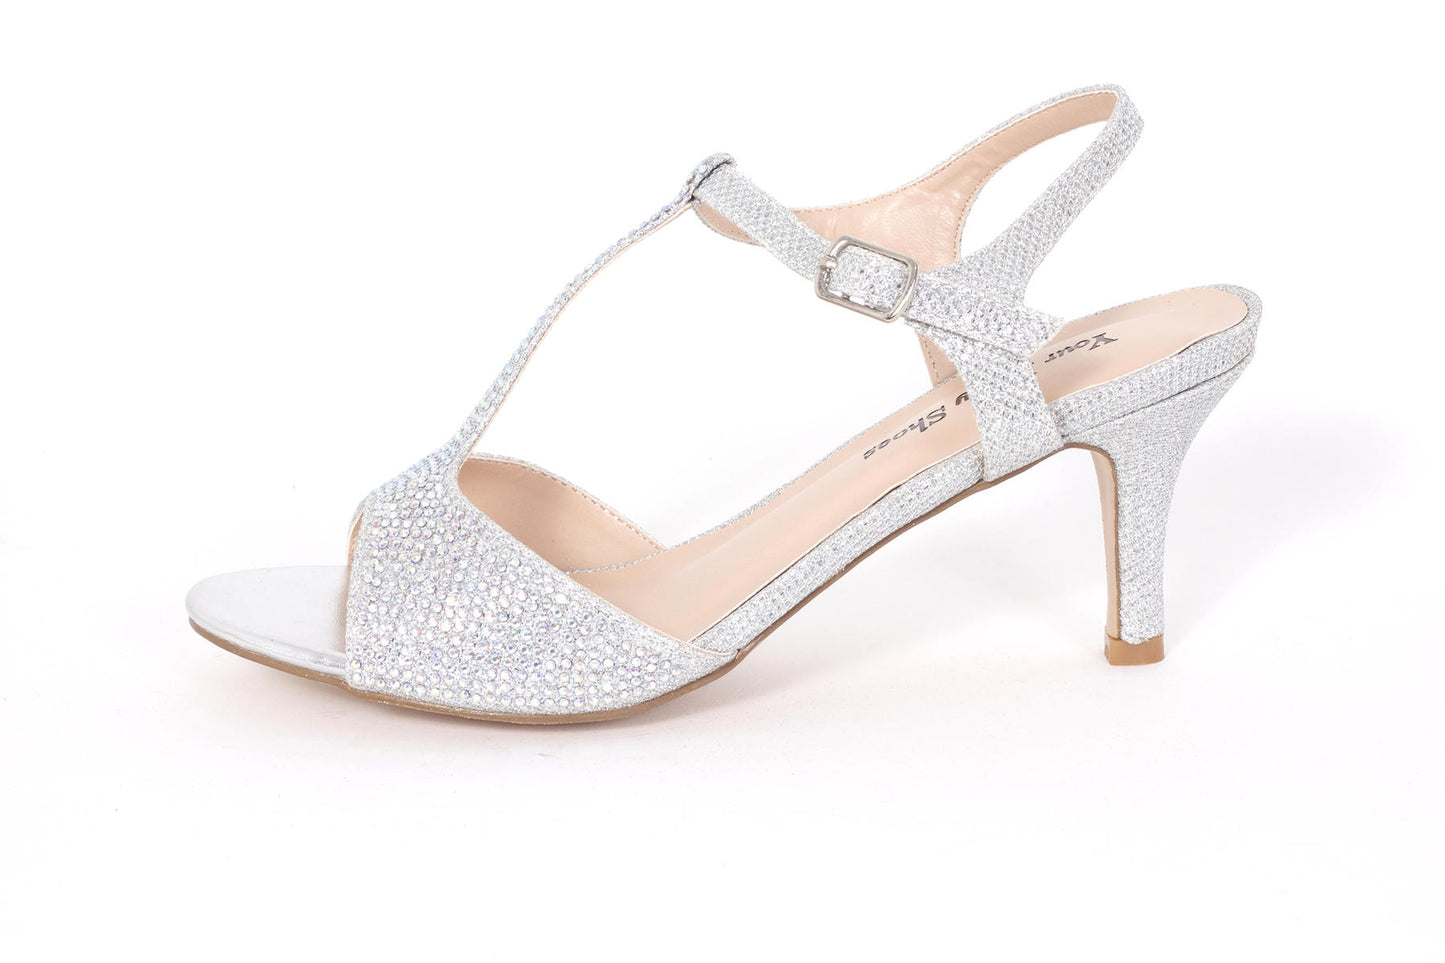 Your Party Shoes Avery Open Toe Silver Short Heel Crystal Embellished Prom Pageant